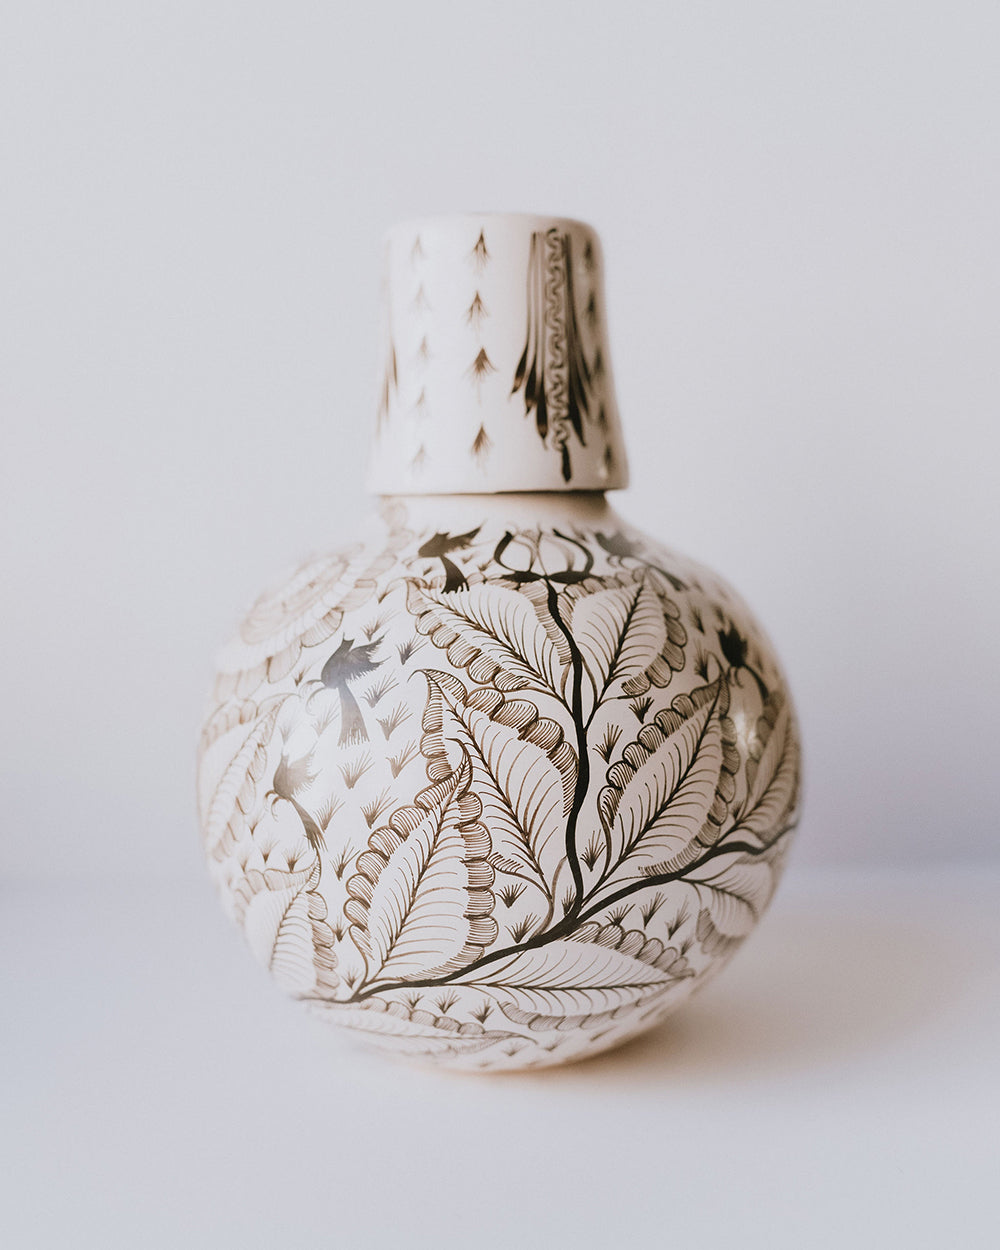 White Handpainted Burnished Ceramic Water Jar Home, Ceramics, Tabeltop, Gifts Mamai Large 8.5 inch diameter by 11 inches tall 100% natural ceramic clay and glazes White